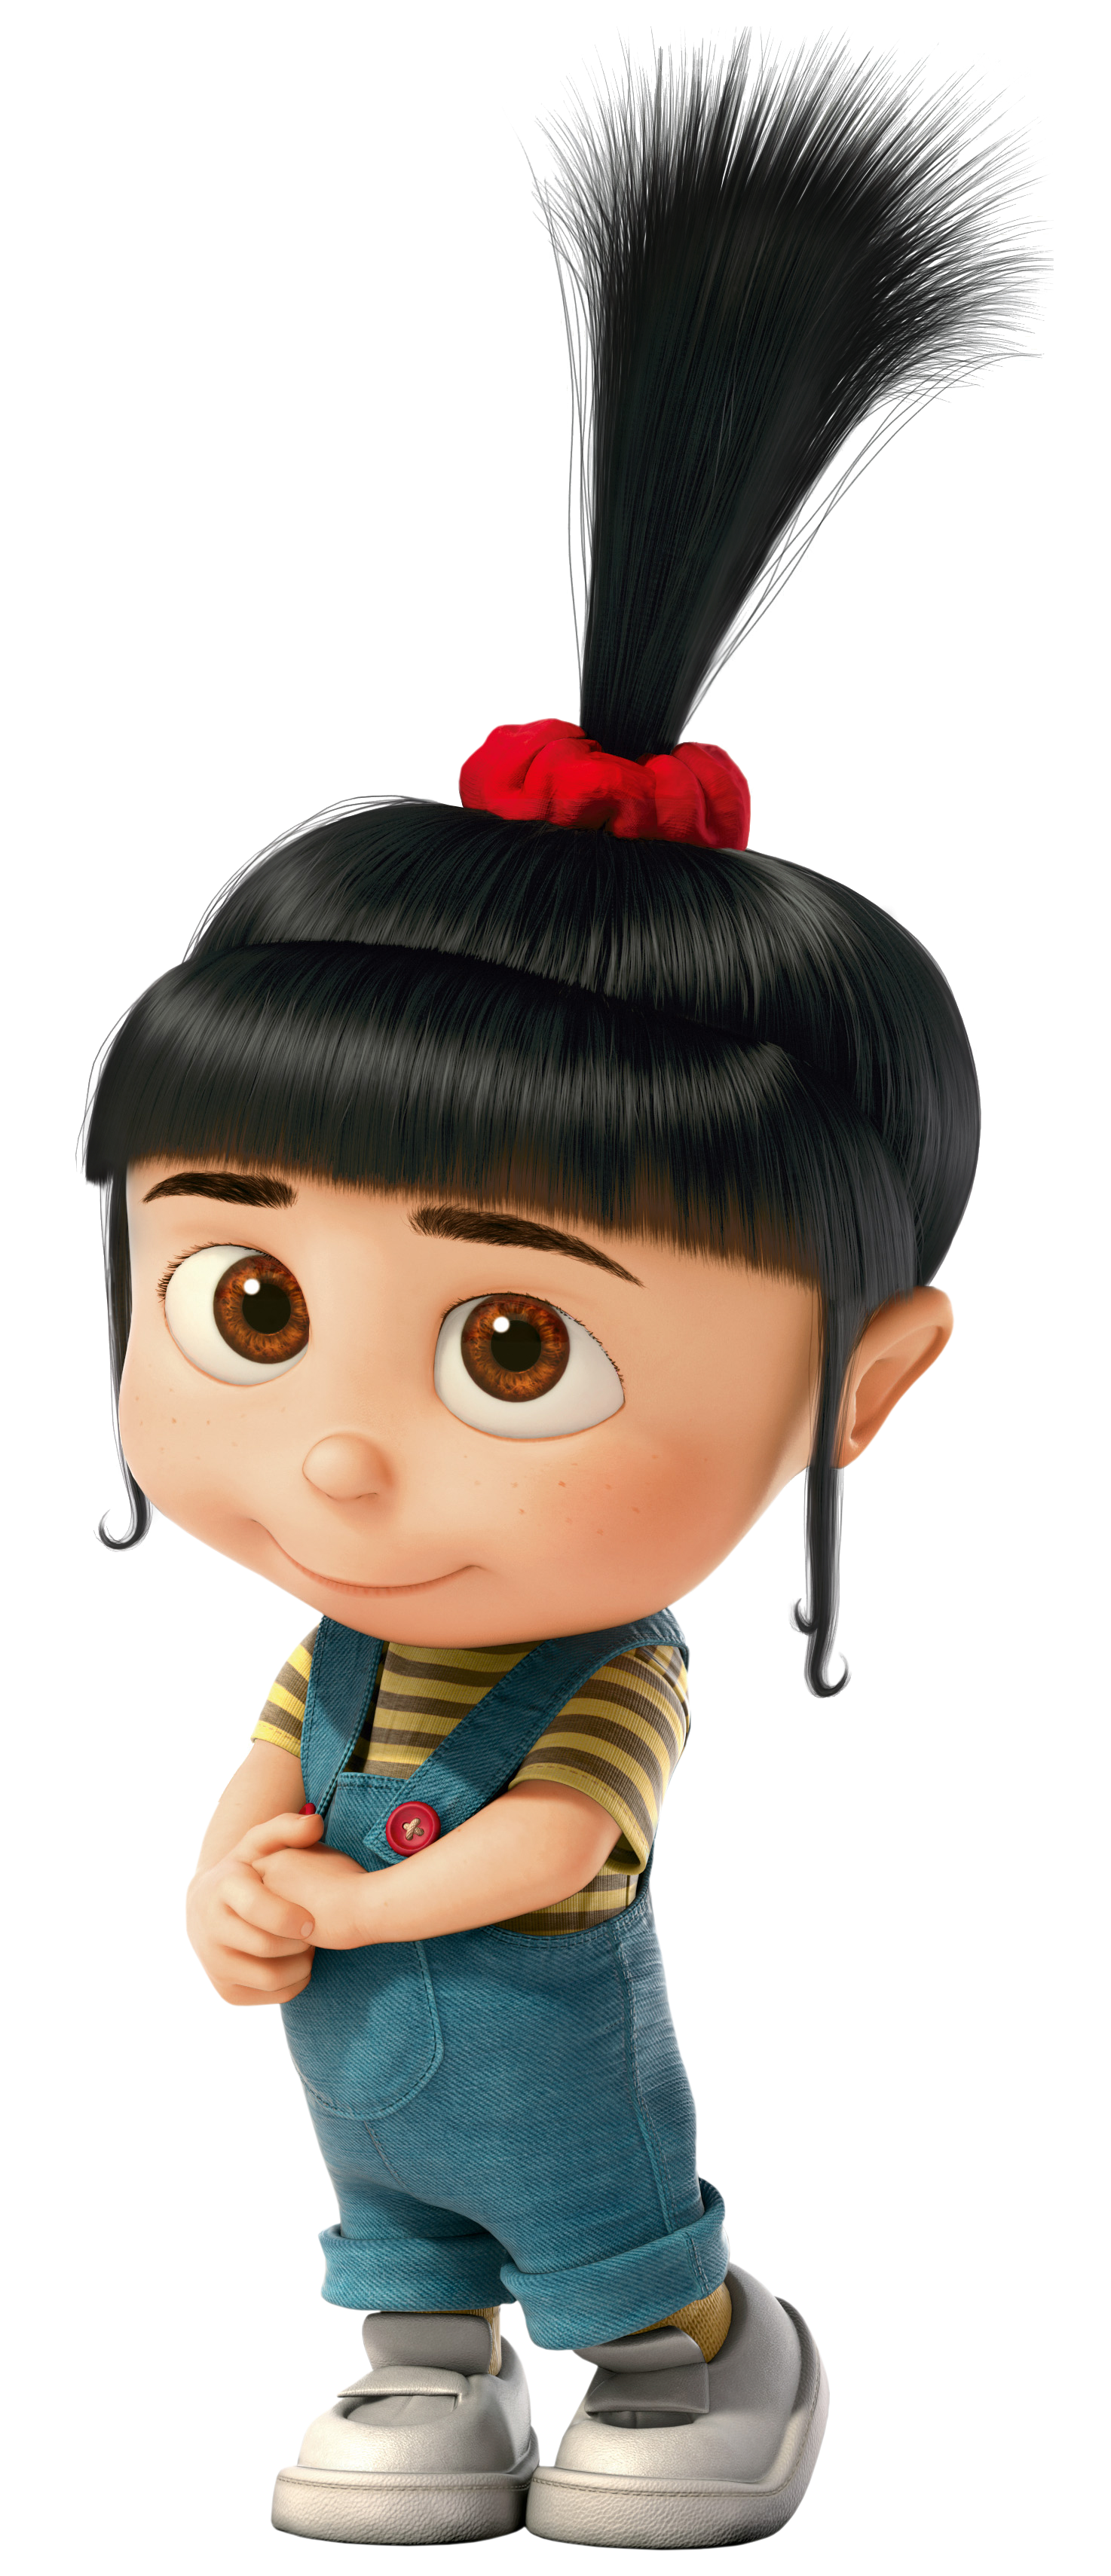 Rush Agnes Minion Edith Youtube Despicable Me: PNG Image